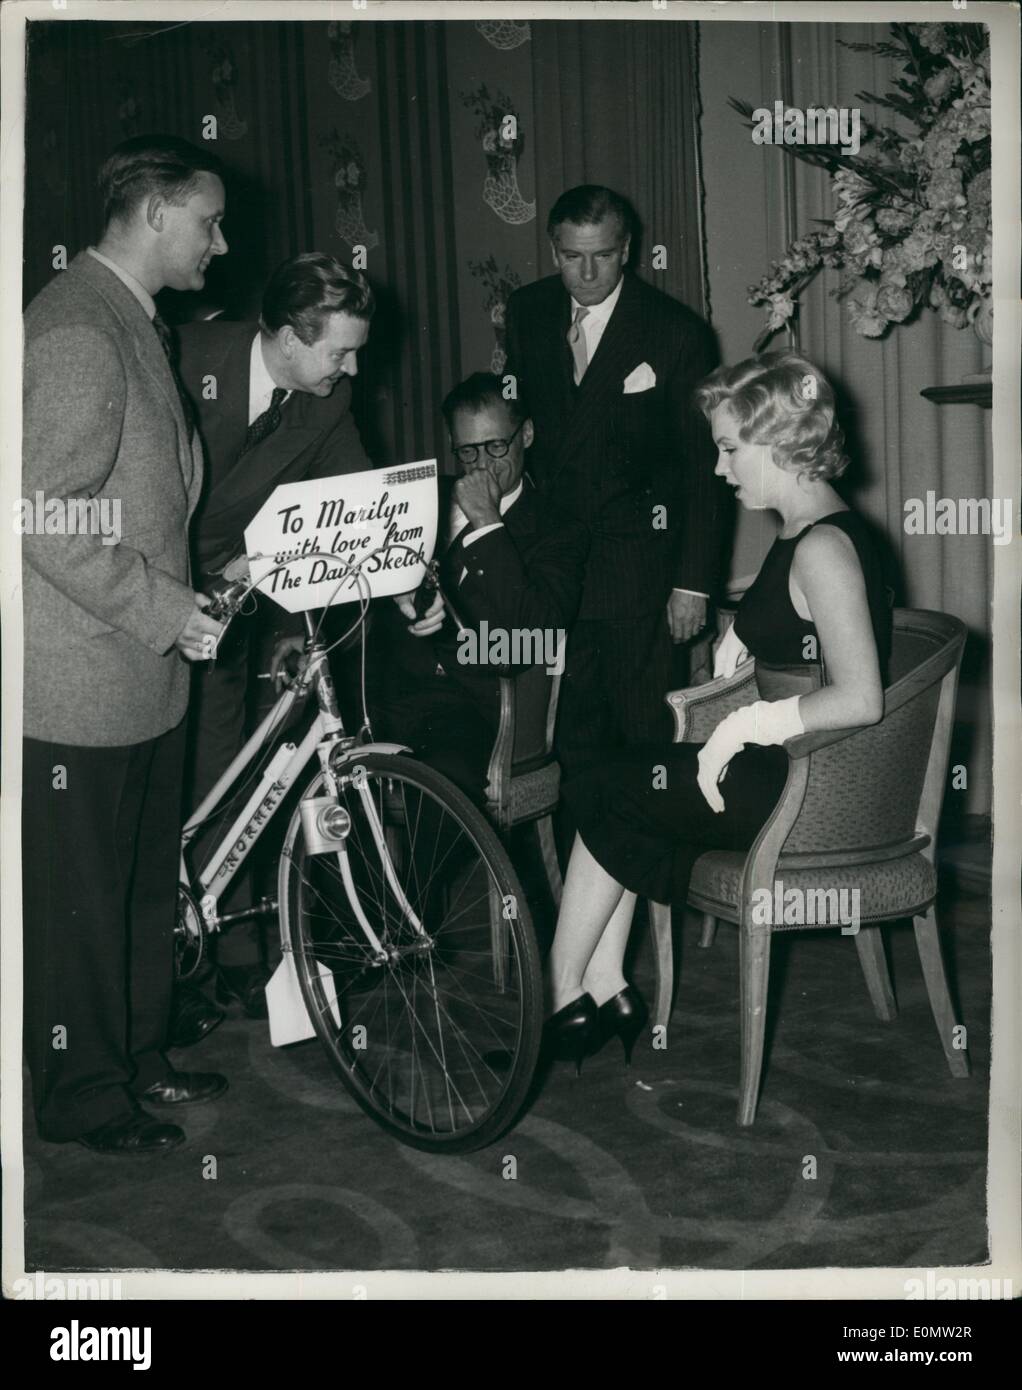 Jul. 07, 1956 - Marilyn Monroe gets her cycle : During a press conference at London's Savoy Hotel to Marilyn Monroe last night she was presented with a cycle. This was done after she had said that she would like to ride around surrey's country lanes on a cycle. Photo shows The cycle is handed over to Marilyn as husband Arthur Miller and Sir Laurence Olivier look on. Stock Photo